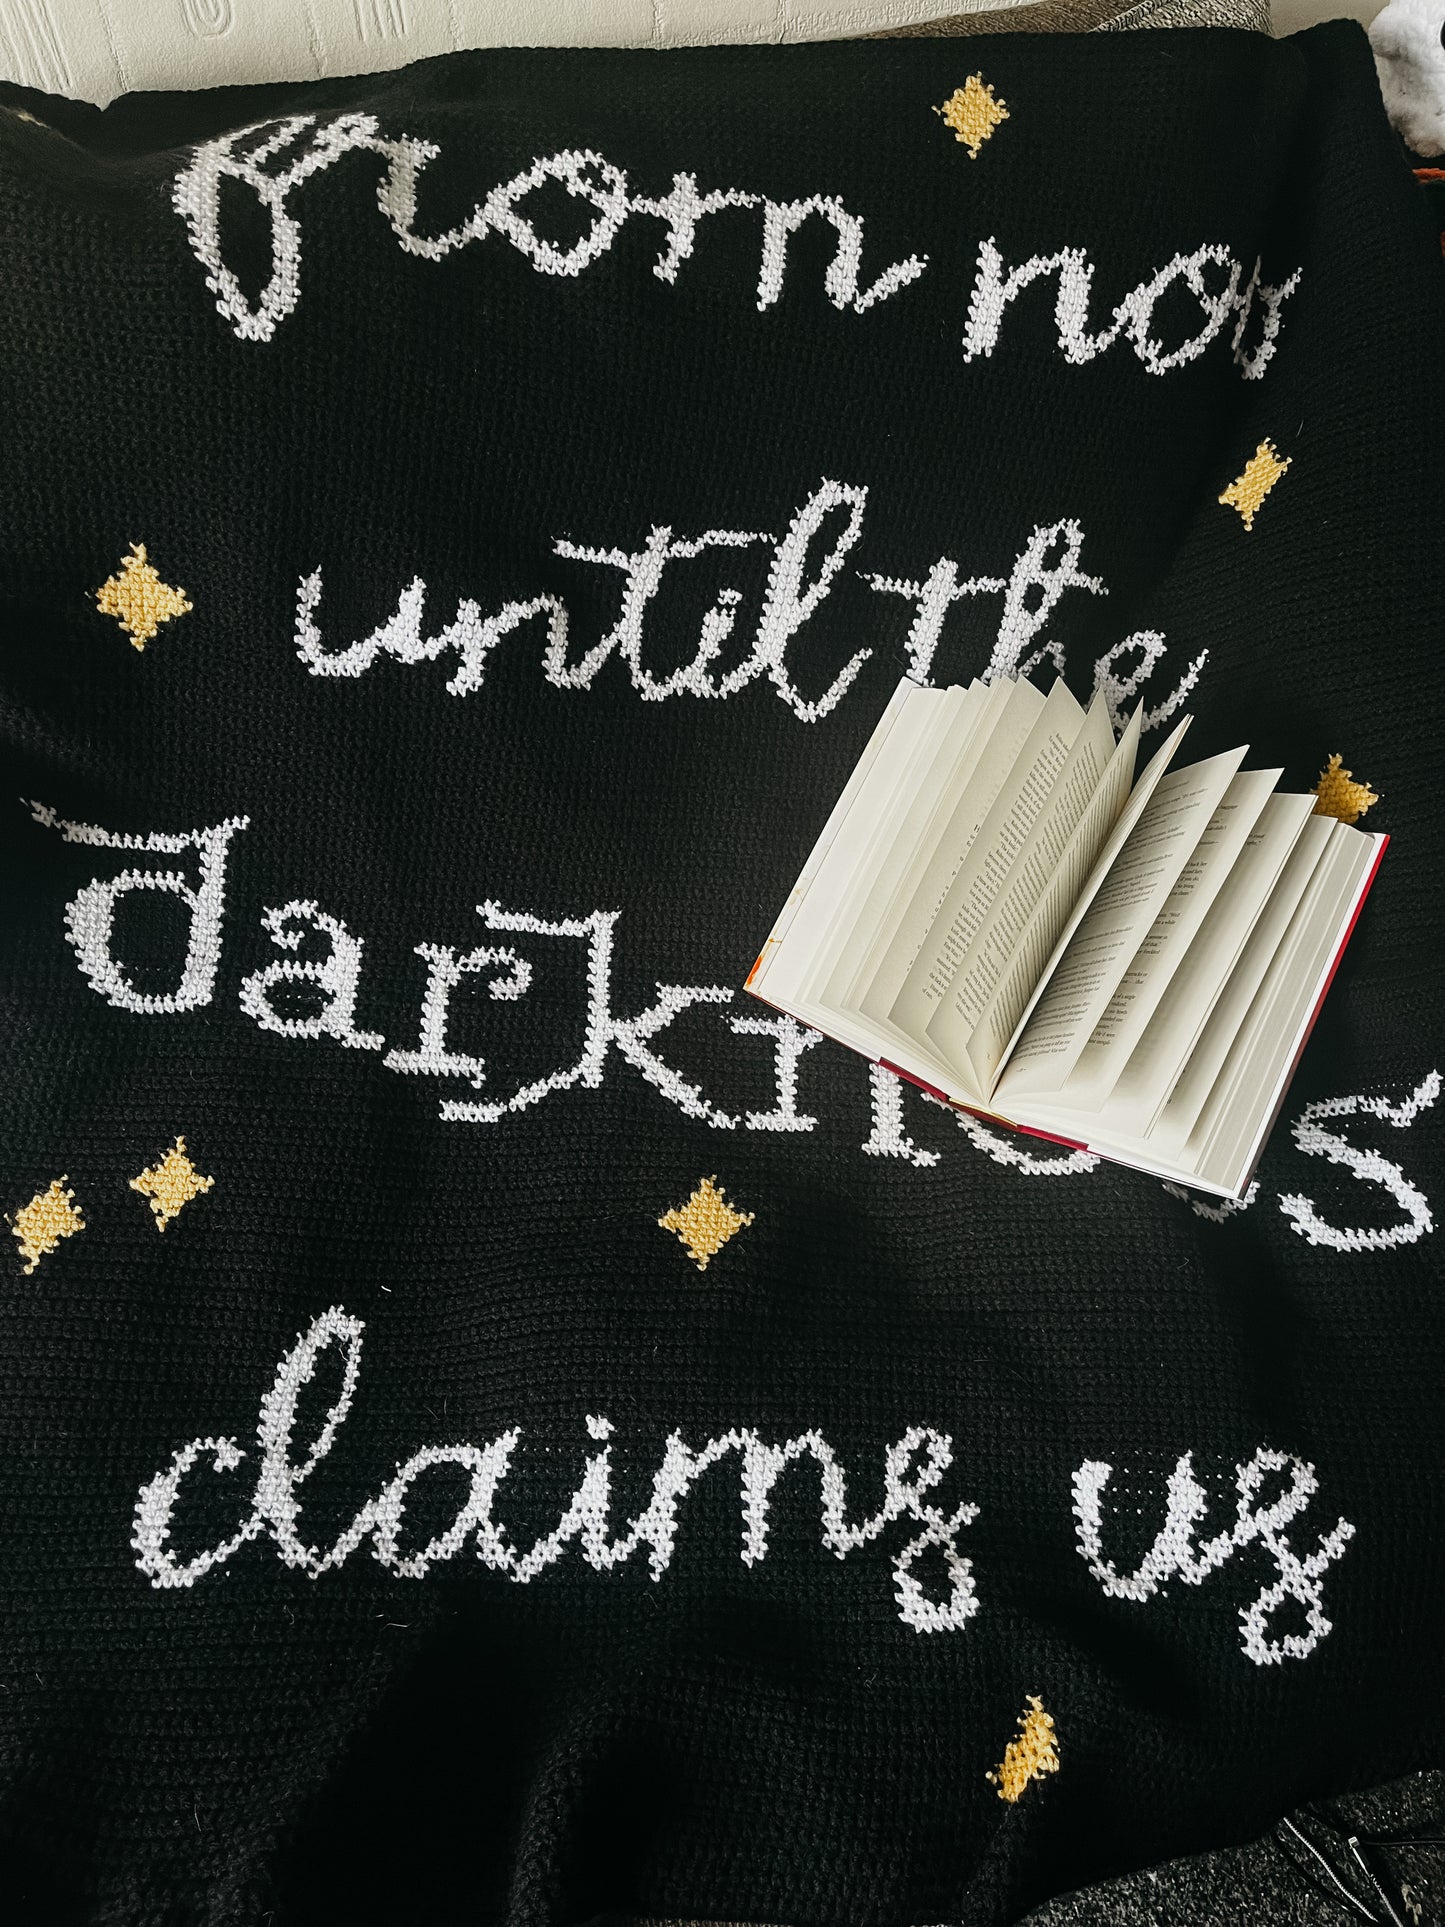 Until The Darkness Claims Us Tapestry Crochet Graphghan Pattern